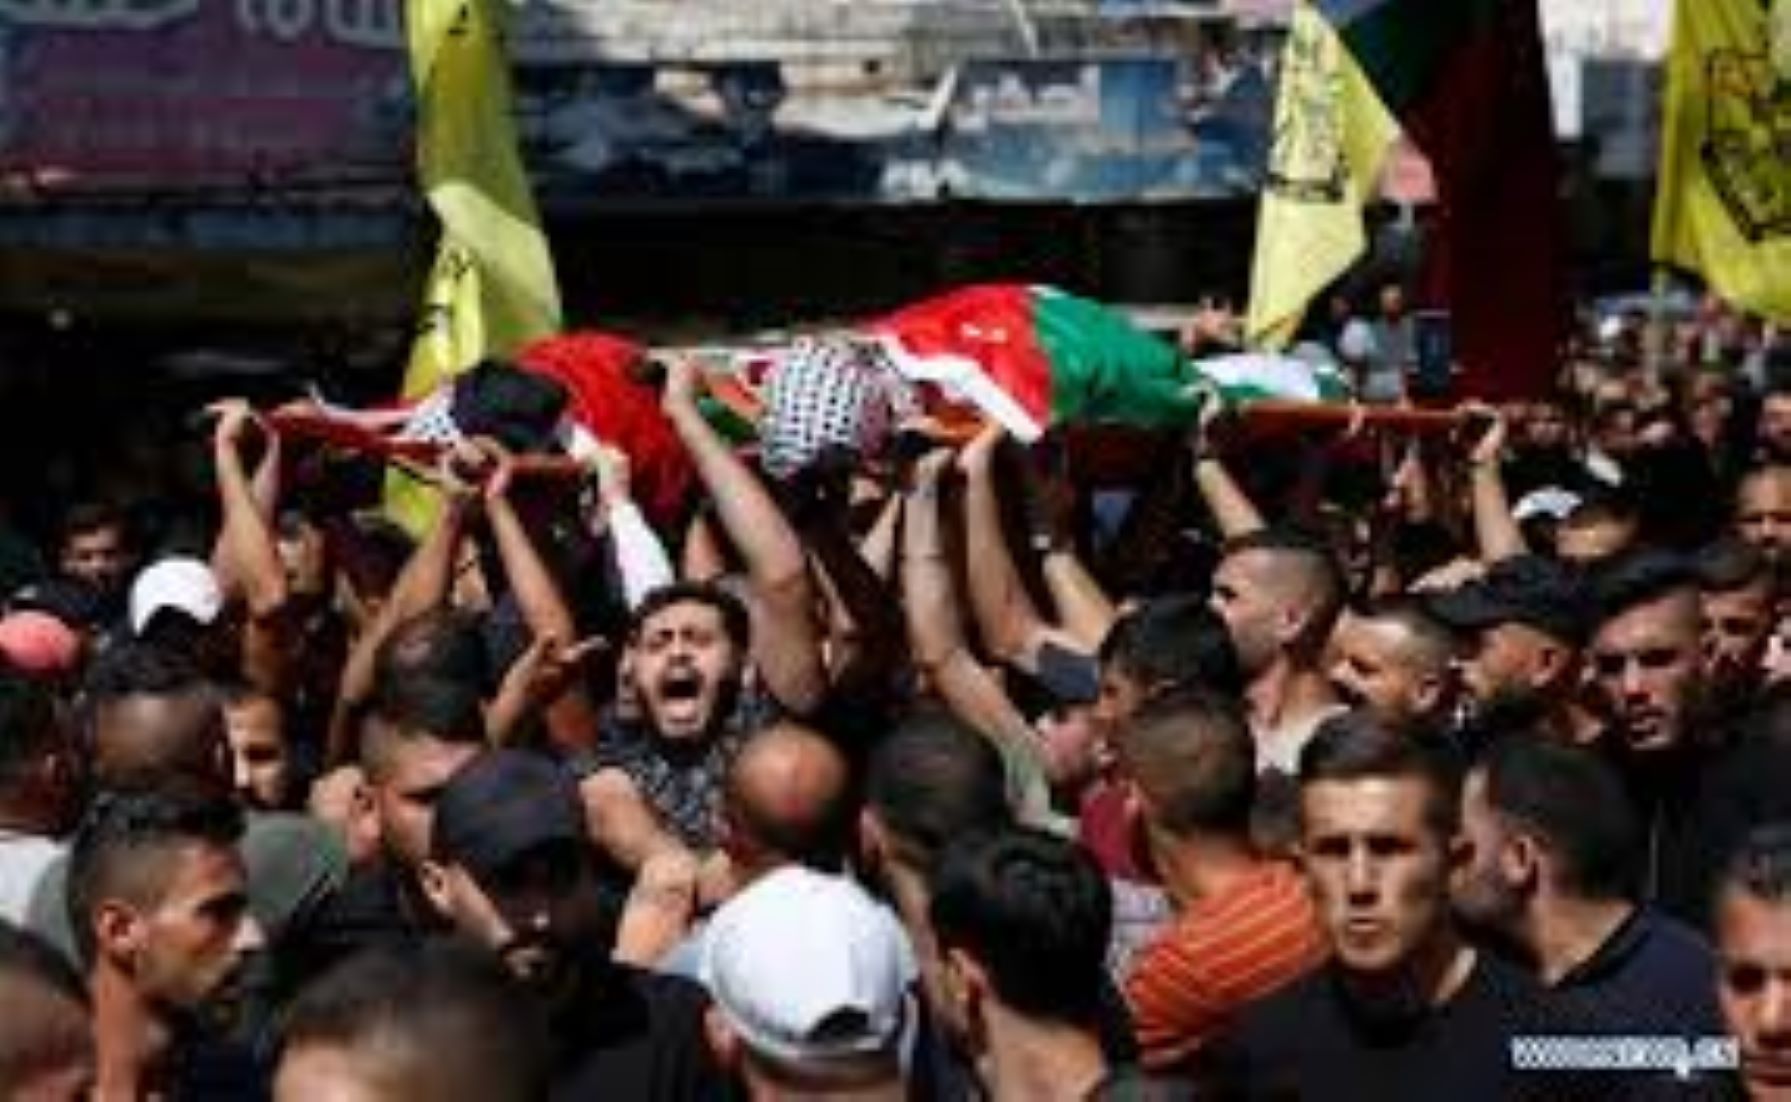 Two Palestinians Killed In Clashes With Israeli Soldiers In West Bank